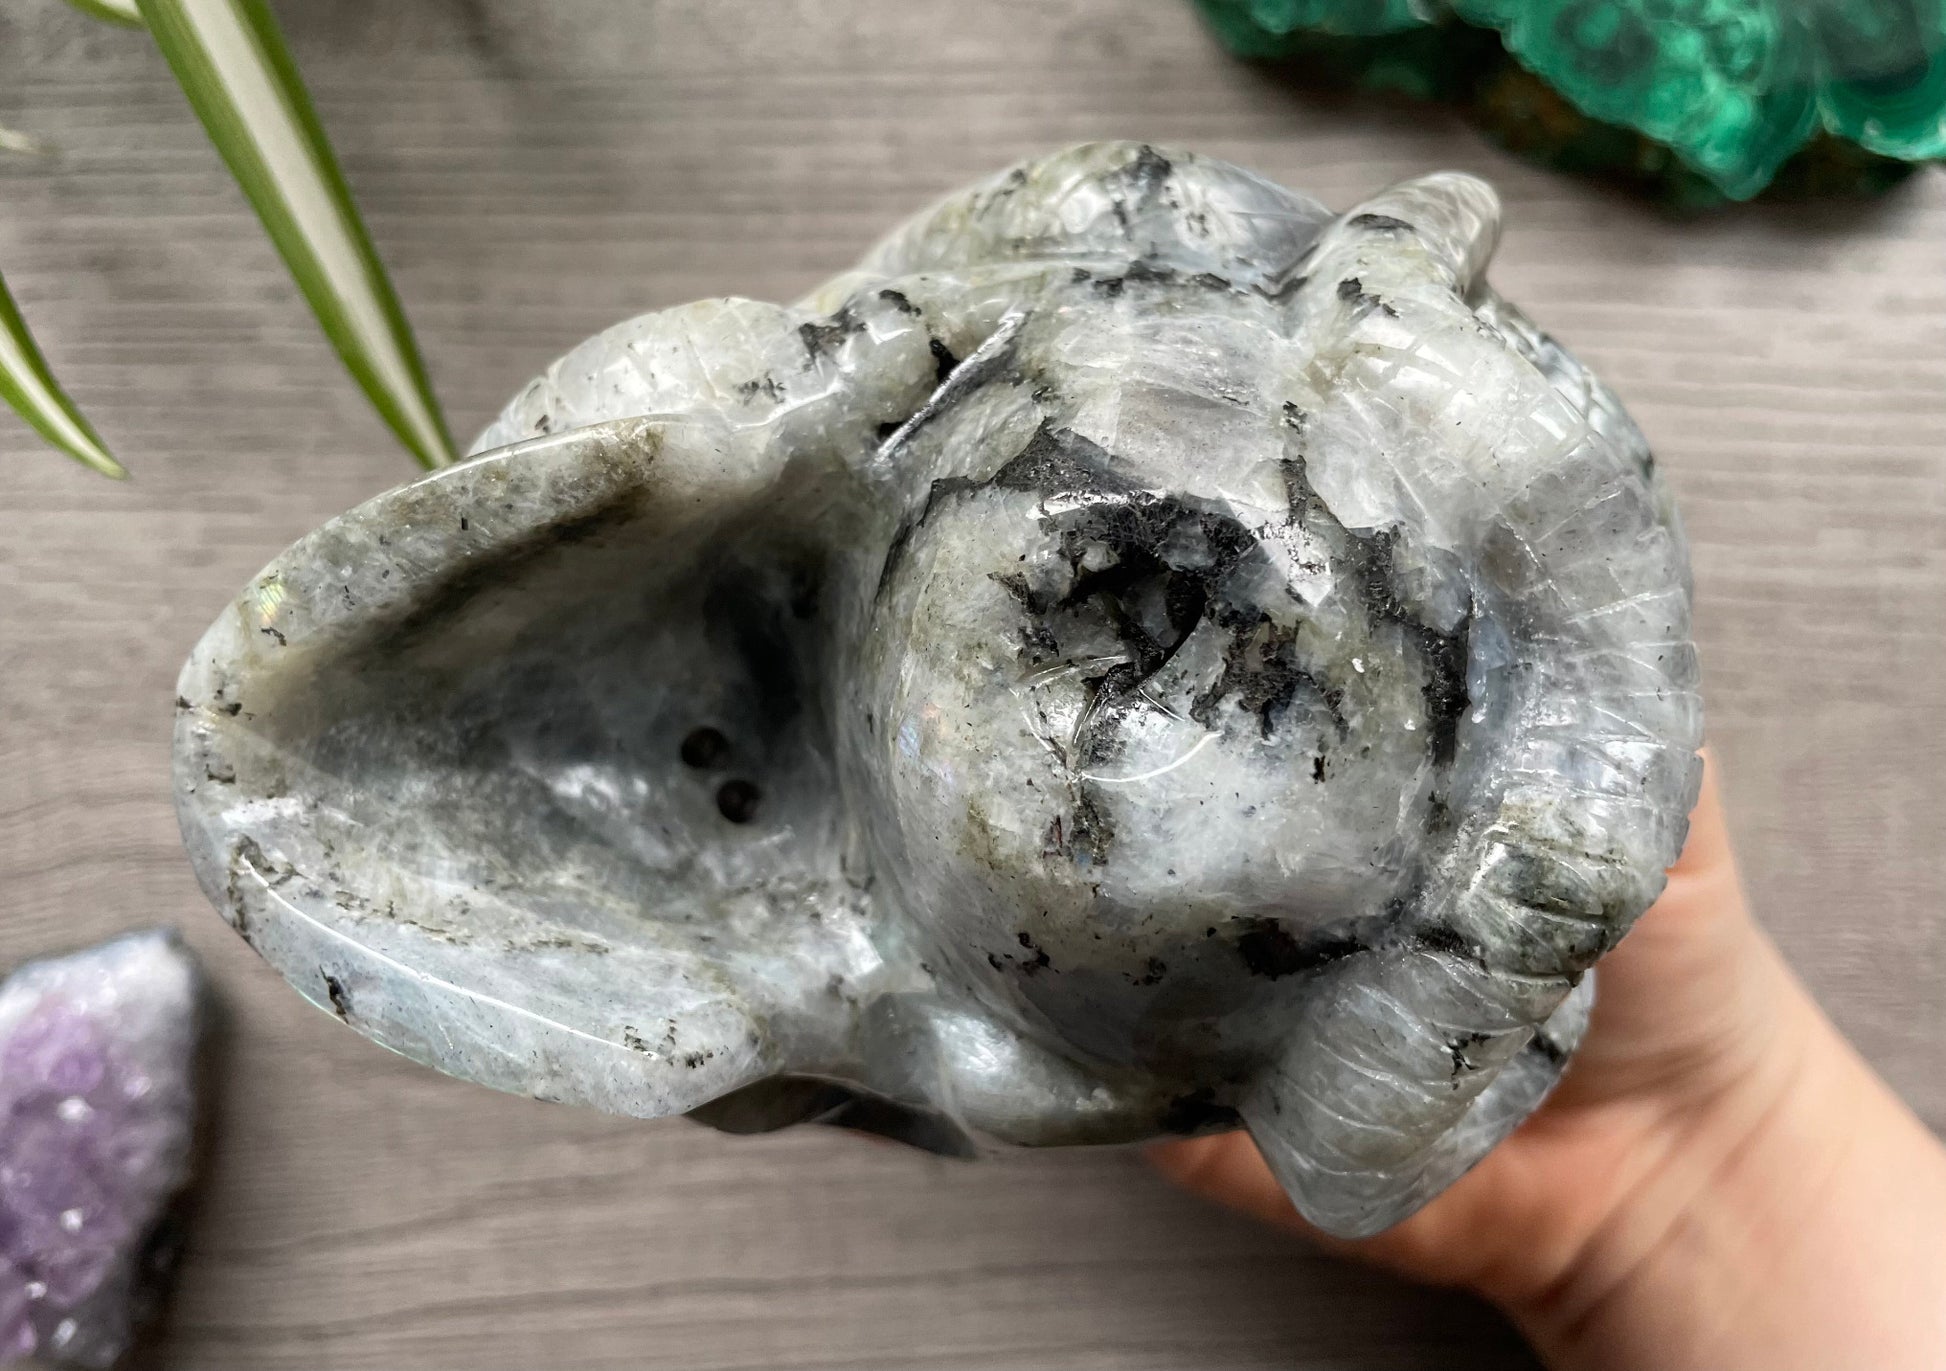 Pictured is a large skull carved out of labradorite with a carved snake wrapped around it.